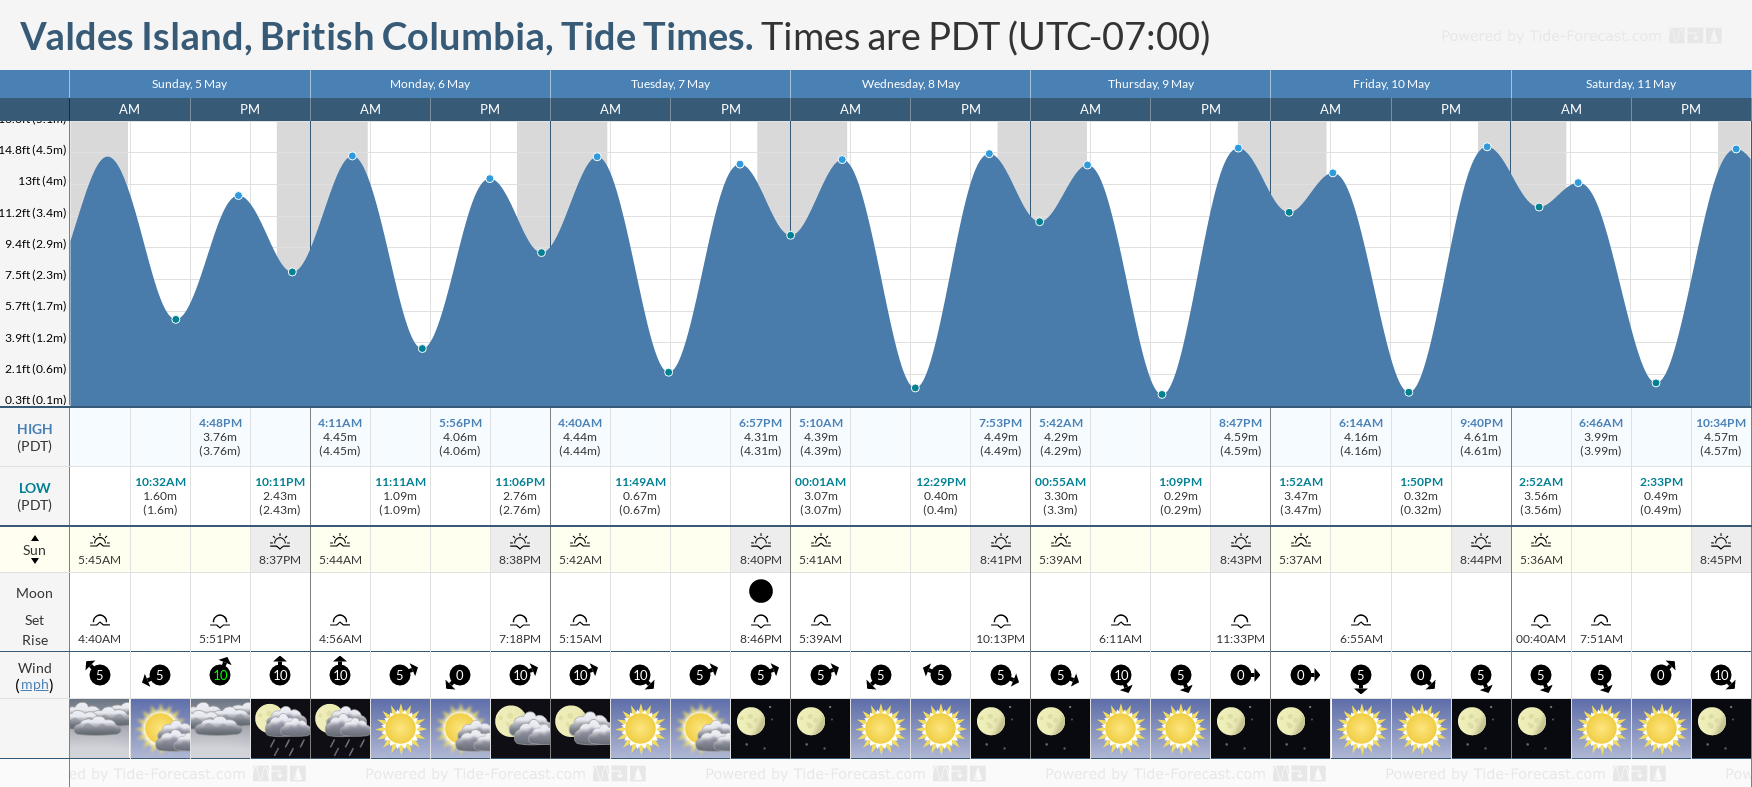 Valdes Island, British Columbia Tide Chart including high and low tide tide times for the next 7 days